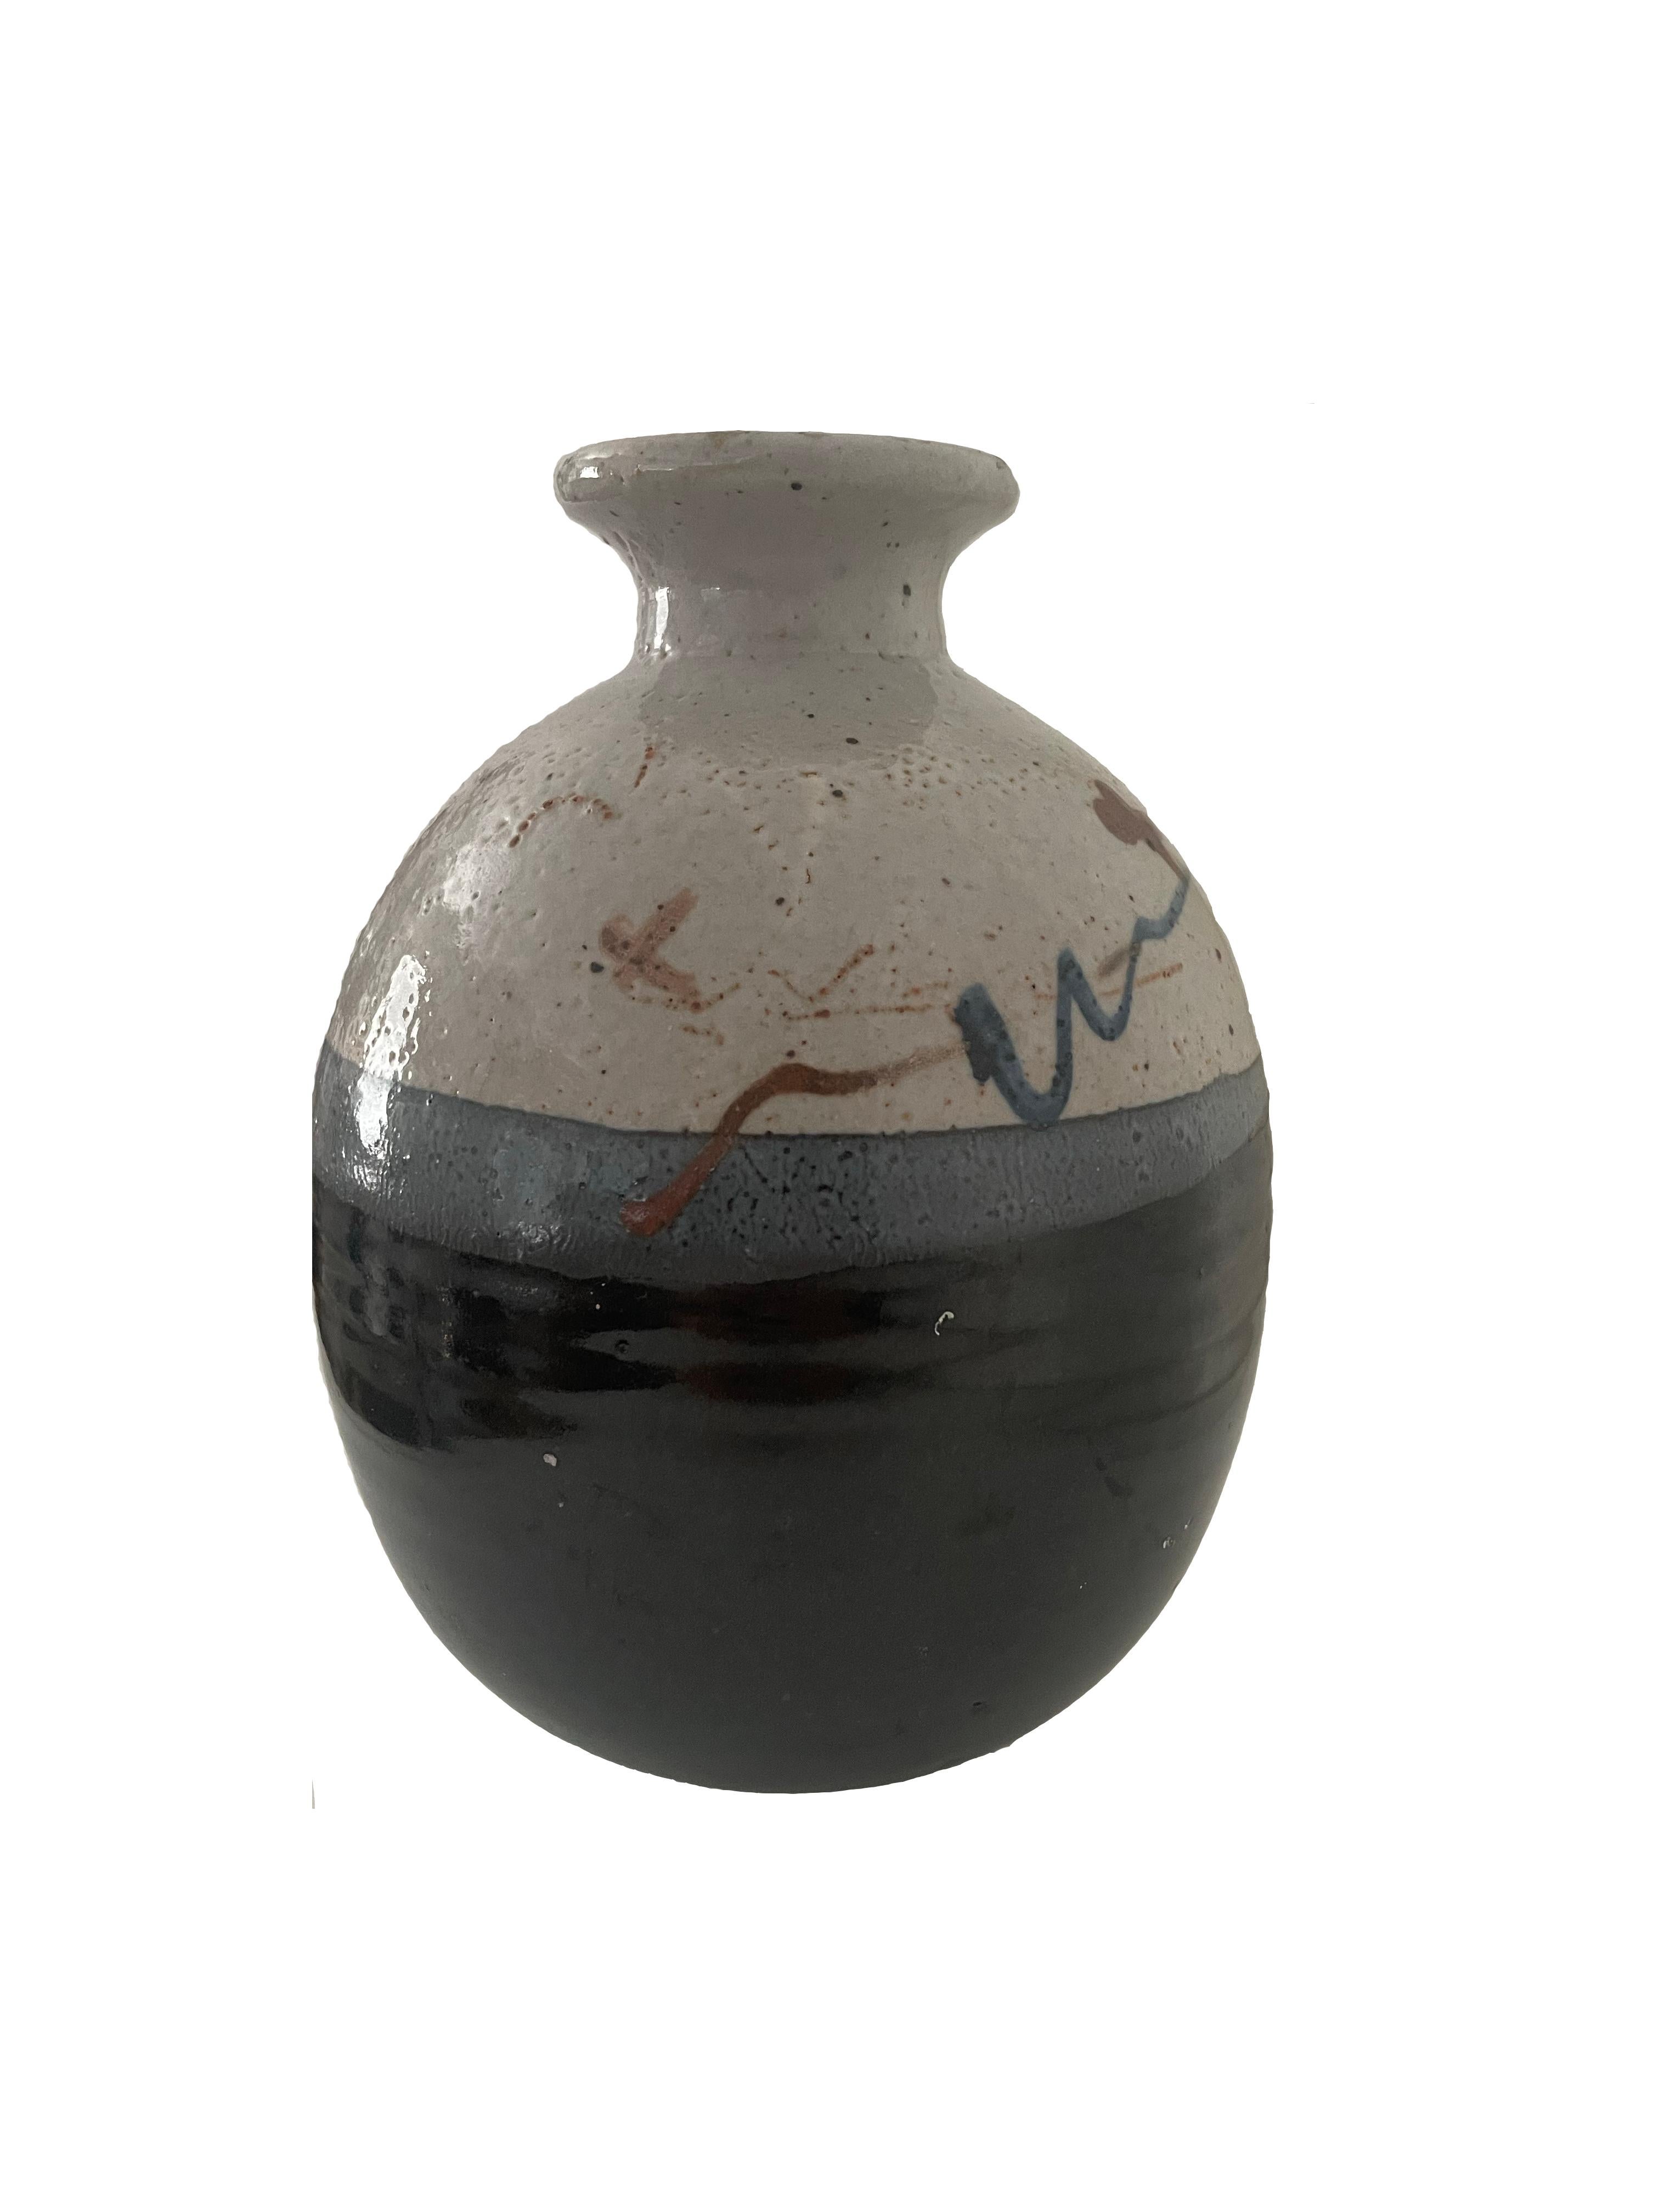 Pottery ash glazed stoneware vase with decorative, hand-painted  brush strokes on upper third of vessel. Dating from the latter 20th century with a narrow, pinched neck and textured surface throughout. Multi-tone glaze in shades of black and light